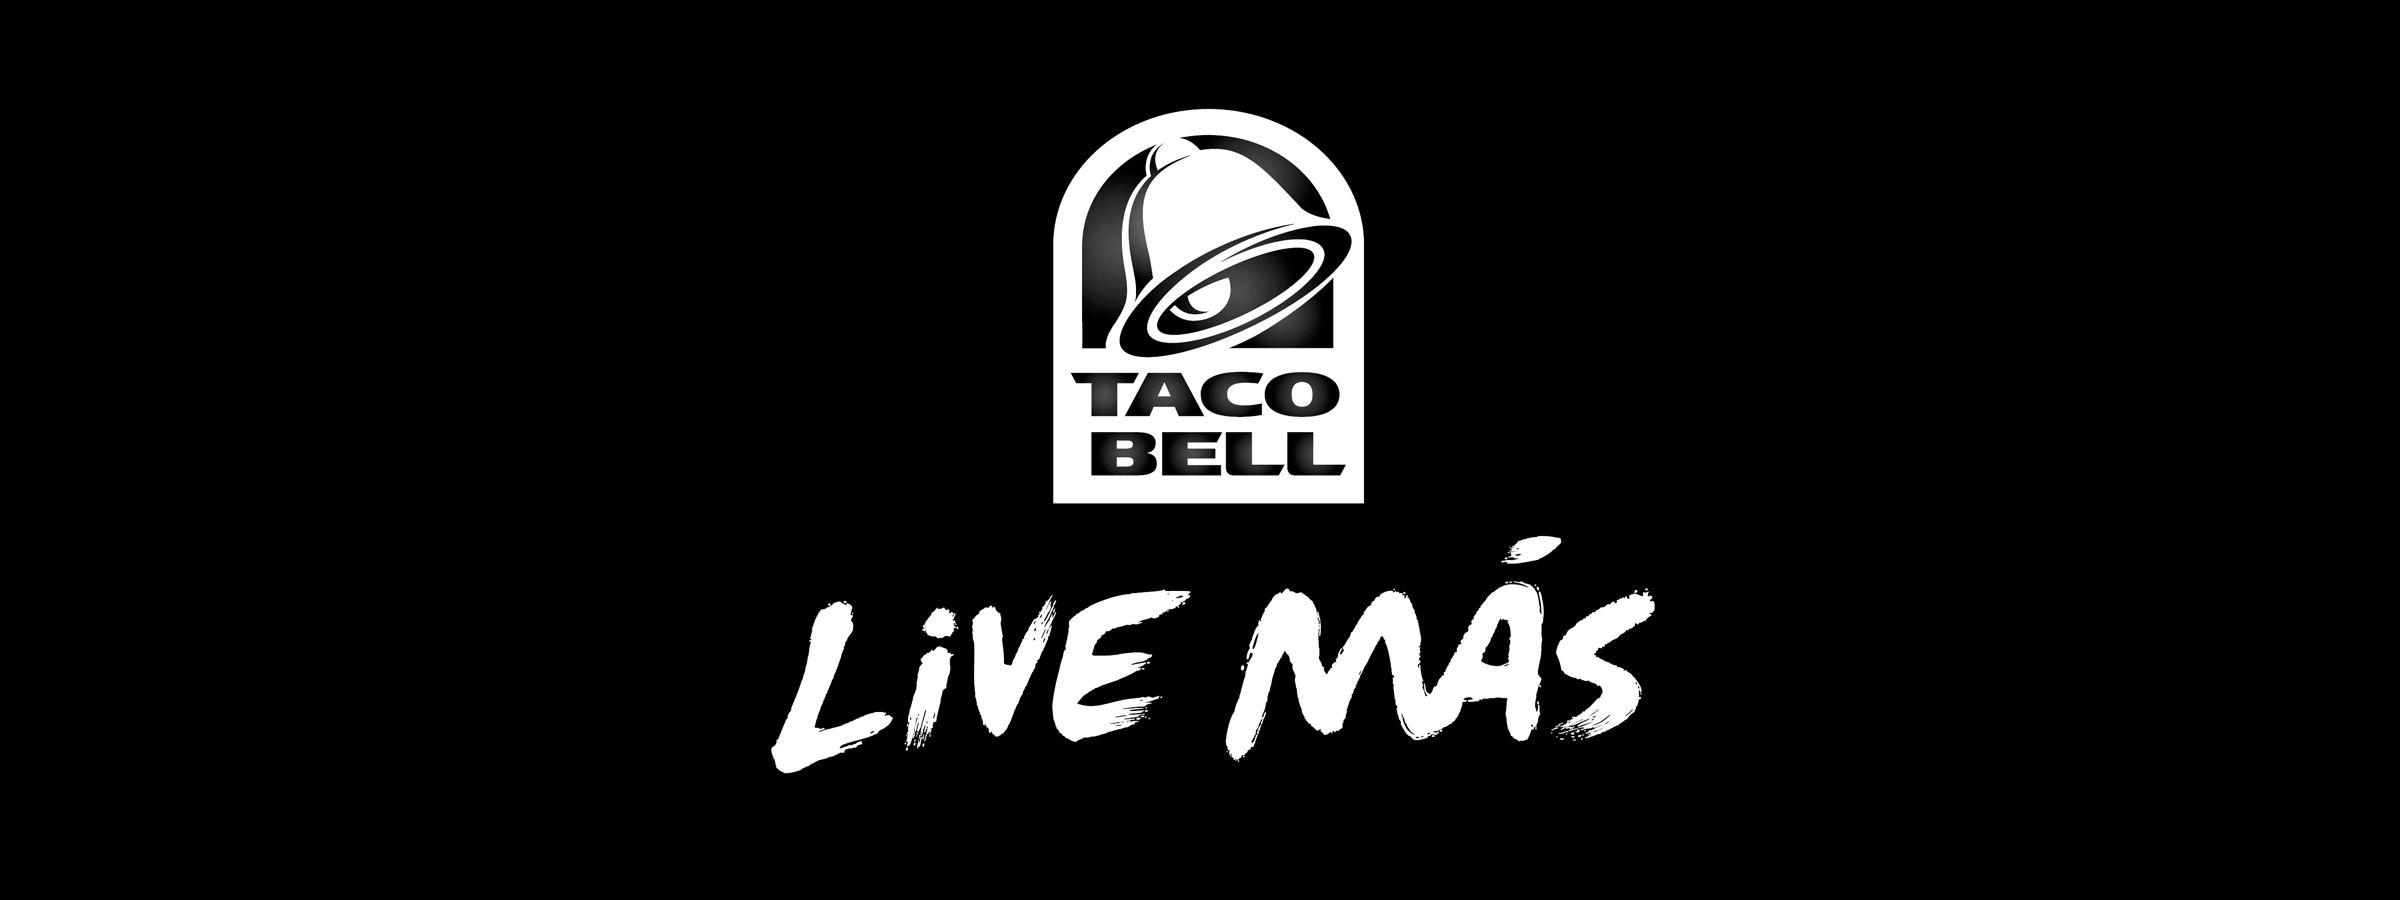 Taco Bell Live Mas Logo - Taco Bell Encourages Customers to “Live Más”